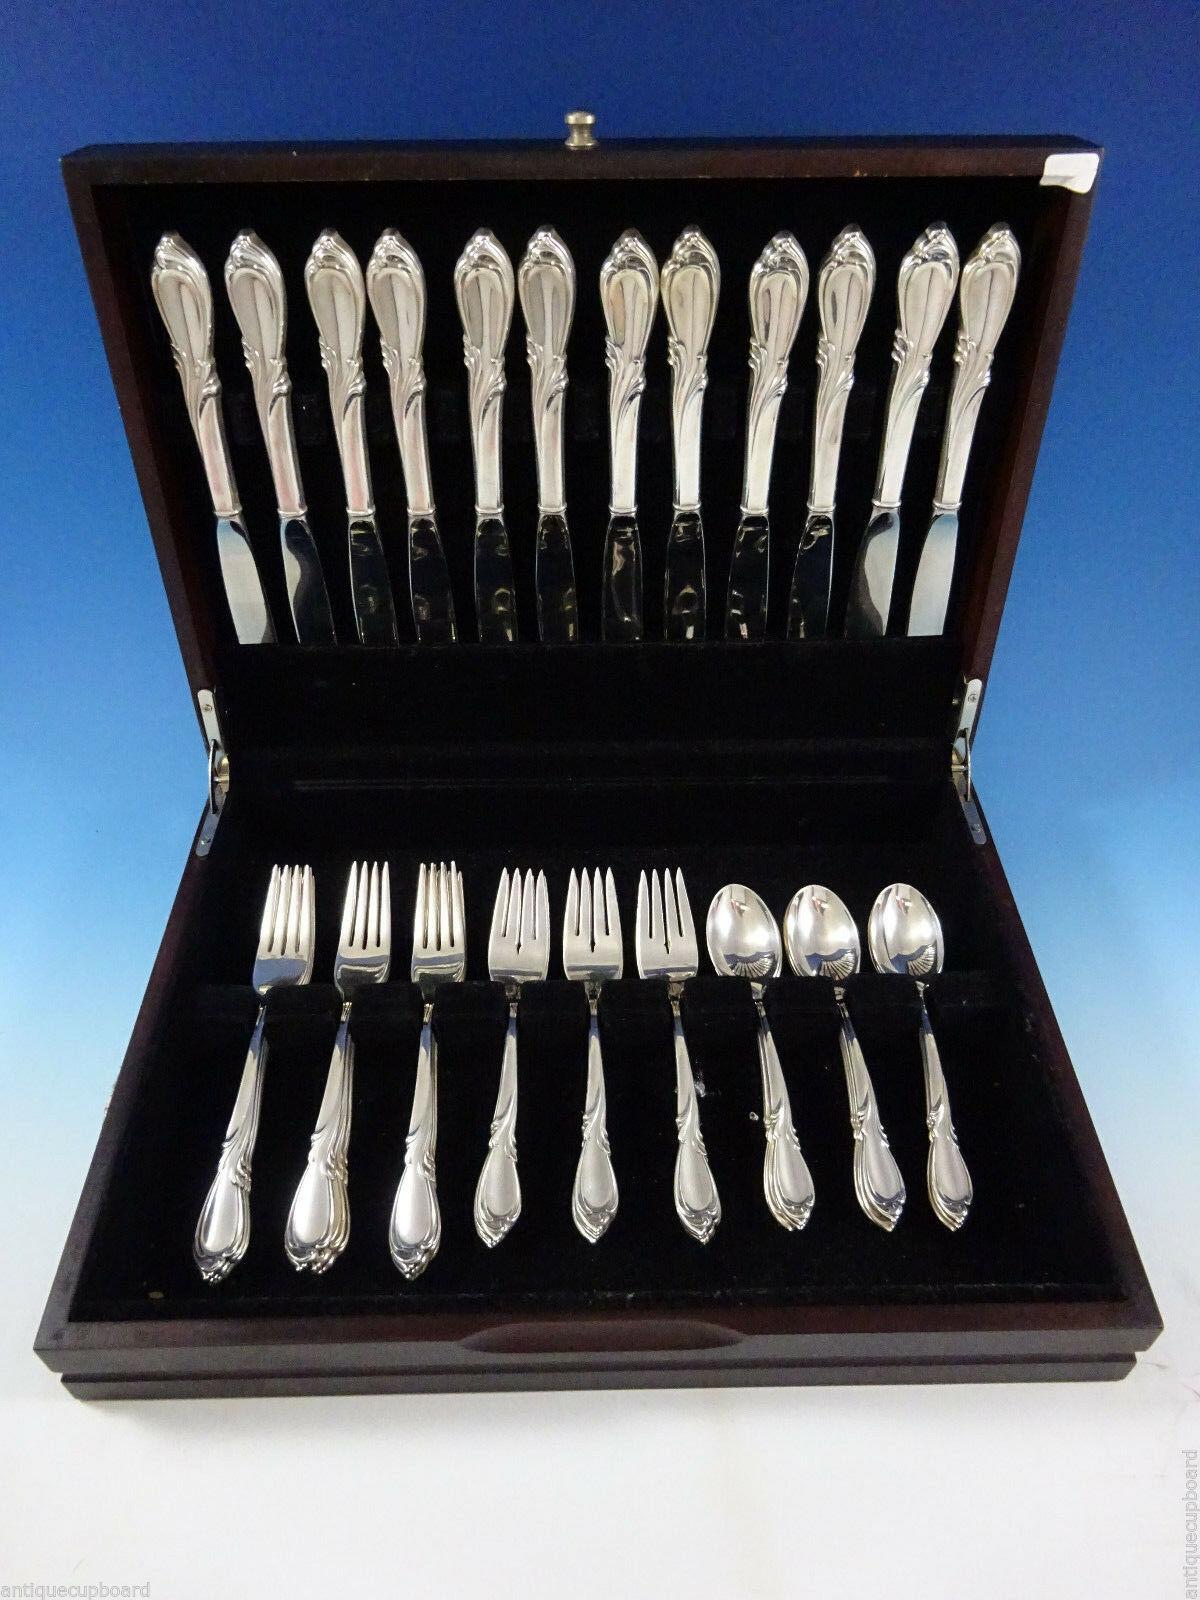 Rhapsody by international sterling silver flatware set - 48 pieces. This set includes:

12 knives, 9 1/4